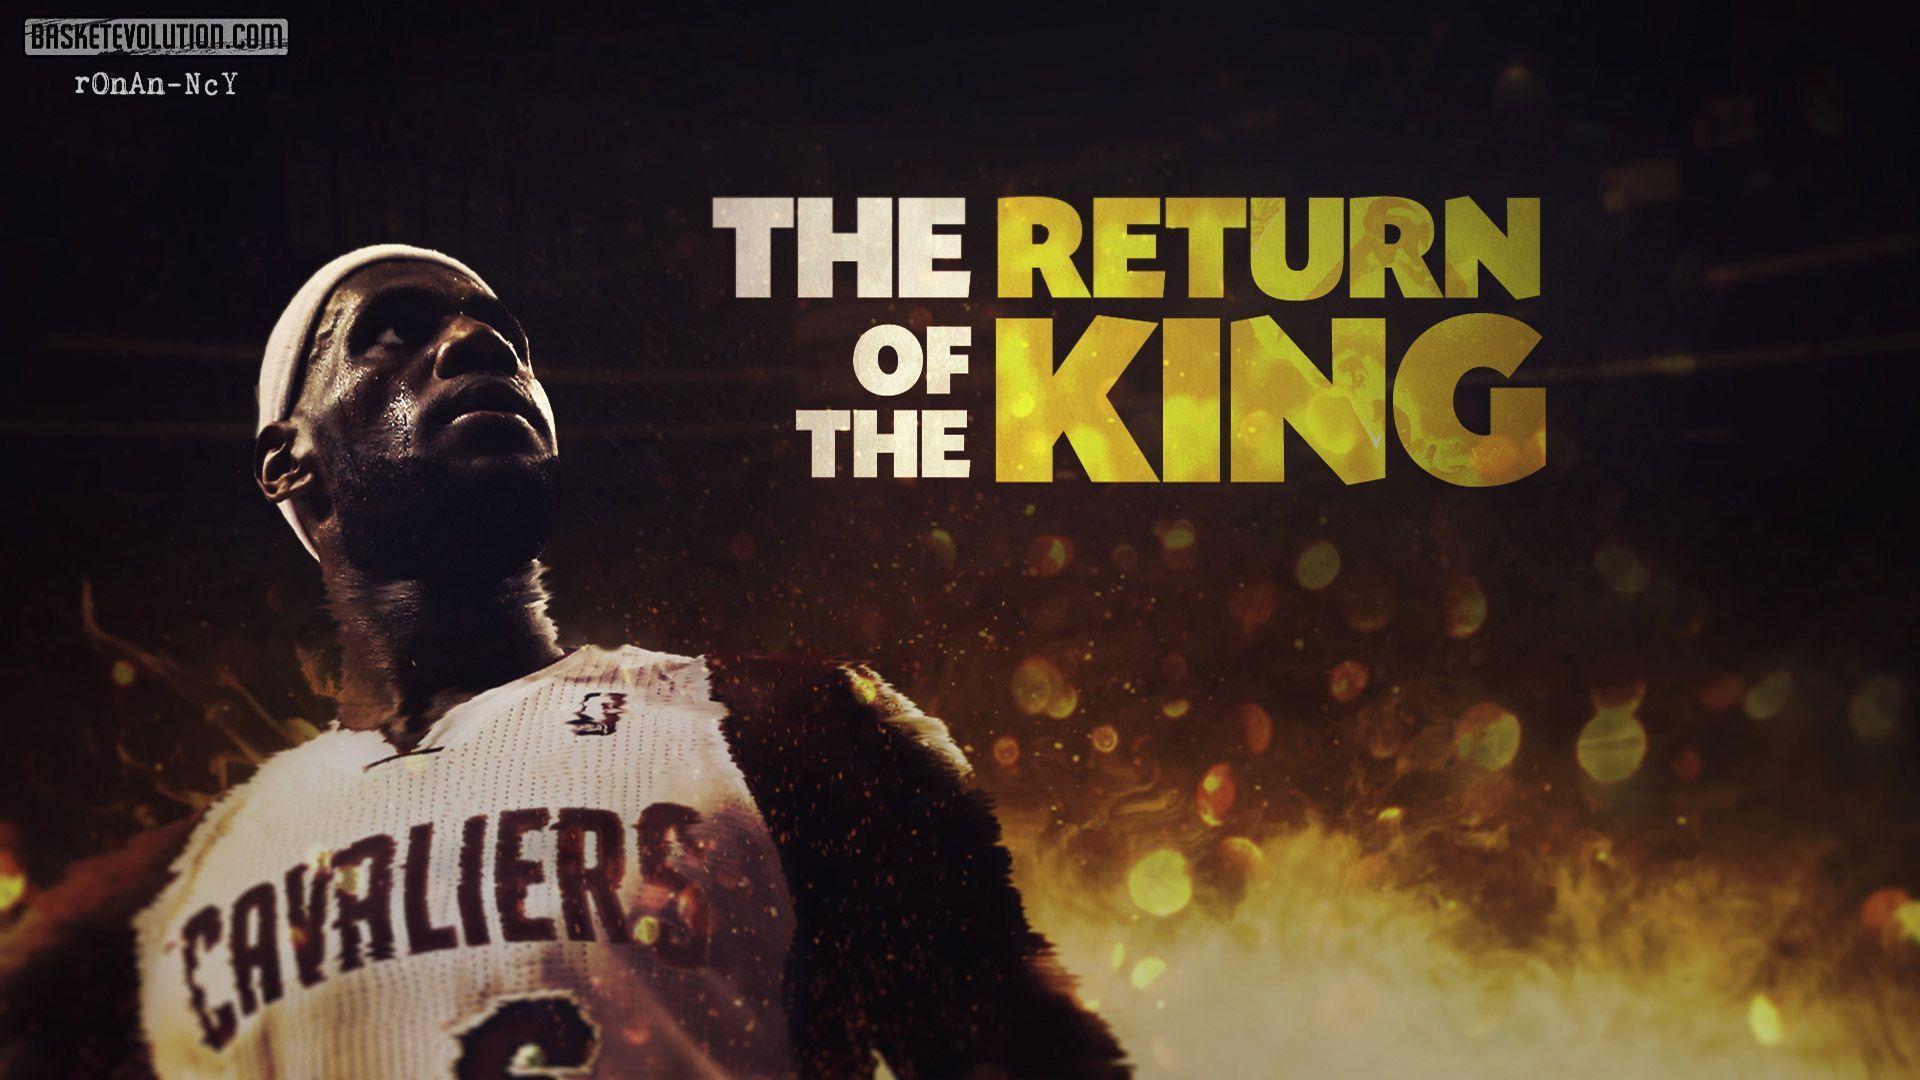 Lebron James Wallpaper 2015 Cool Best Cavaliers Player image